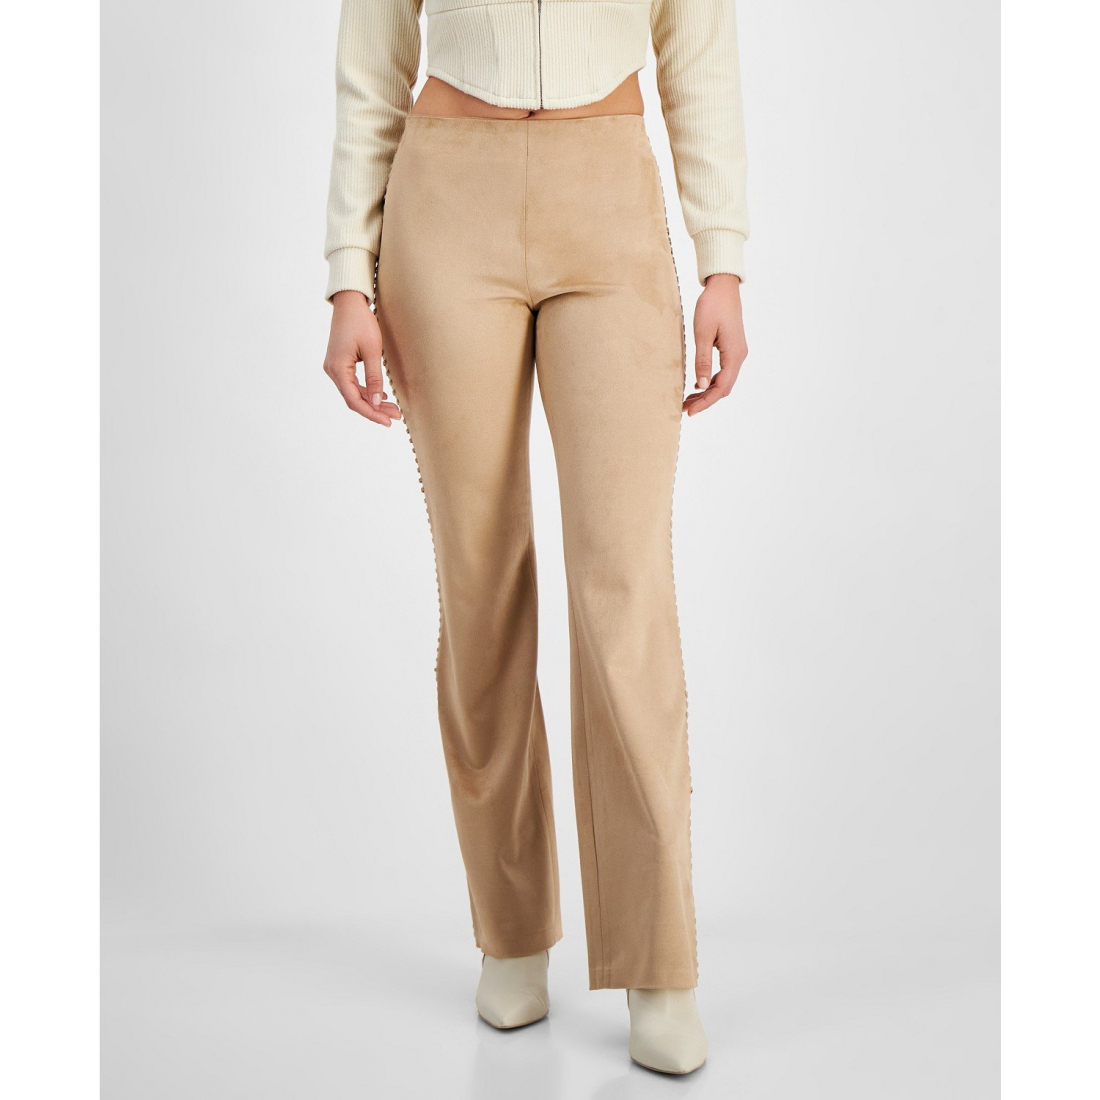 Women's 'Ornella Whipstitched' Trousers